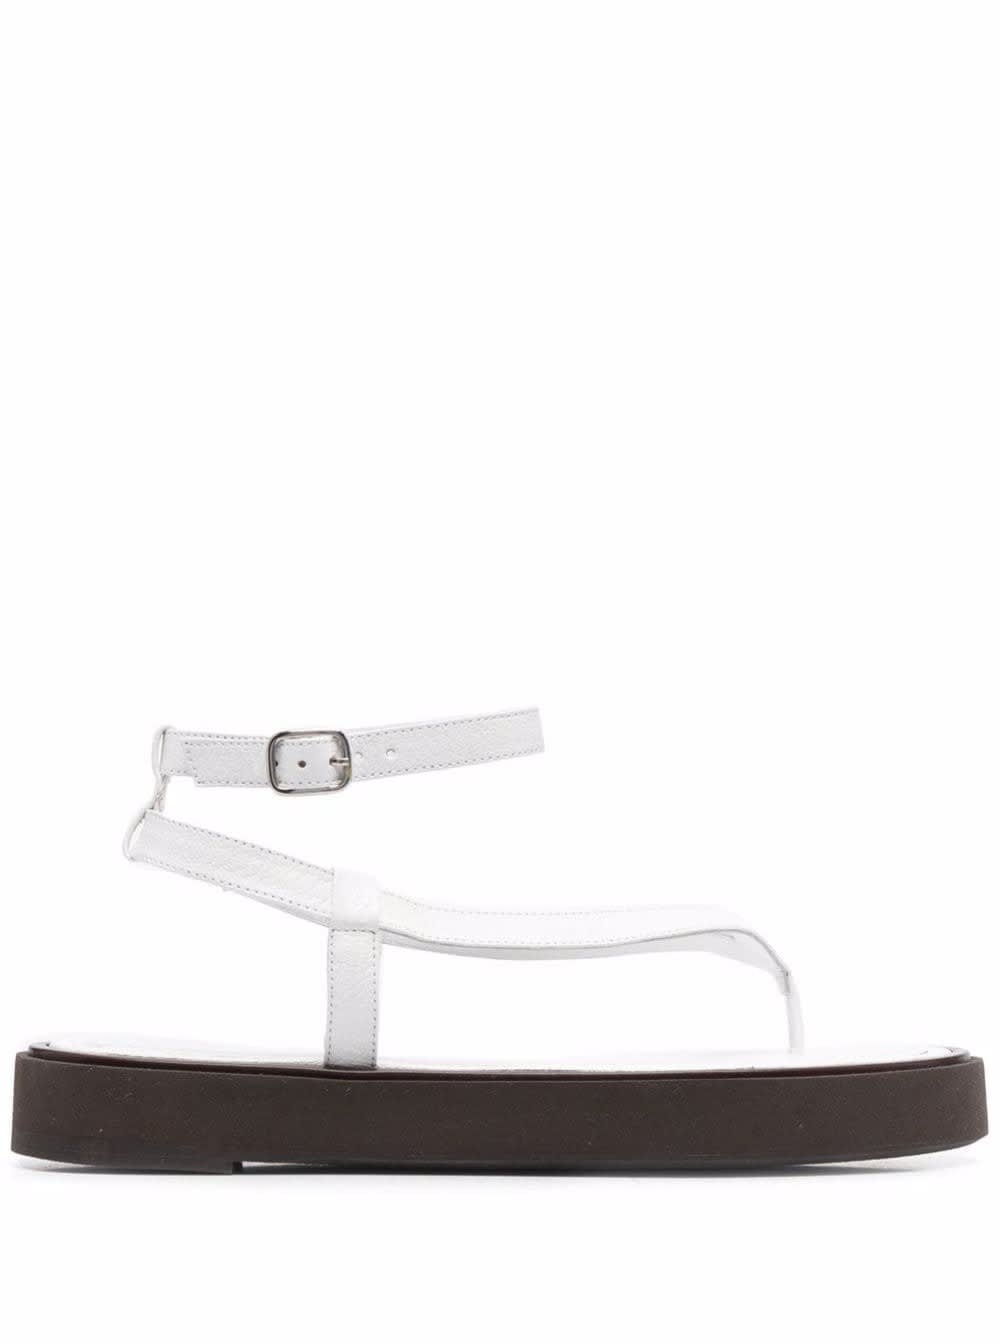 Cece By Far Woman White Leather Sandals